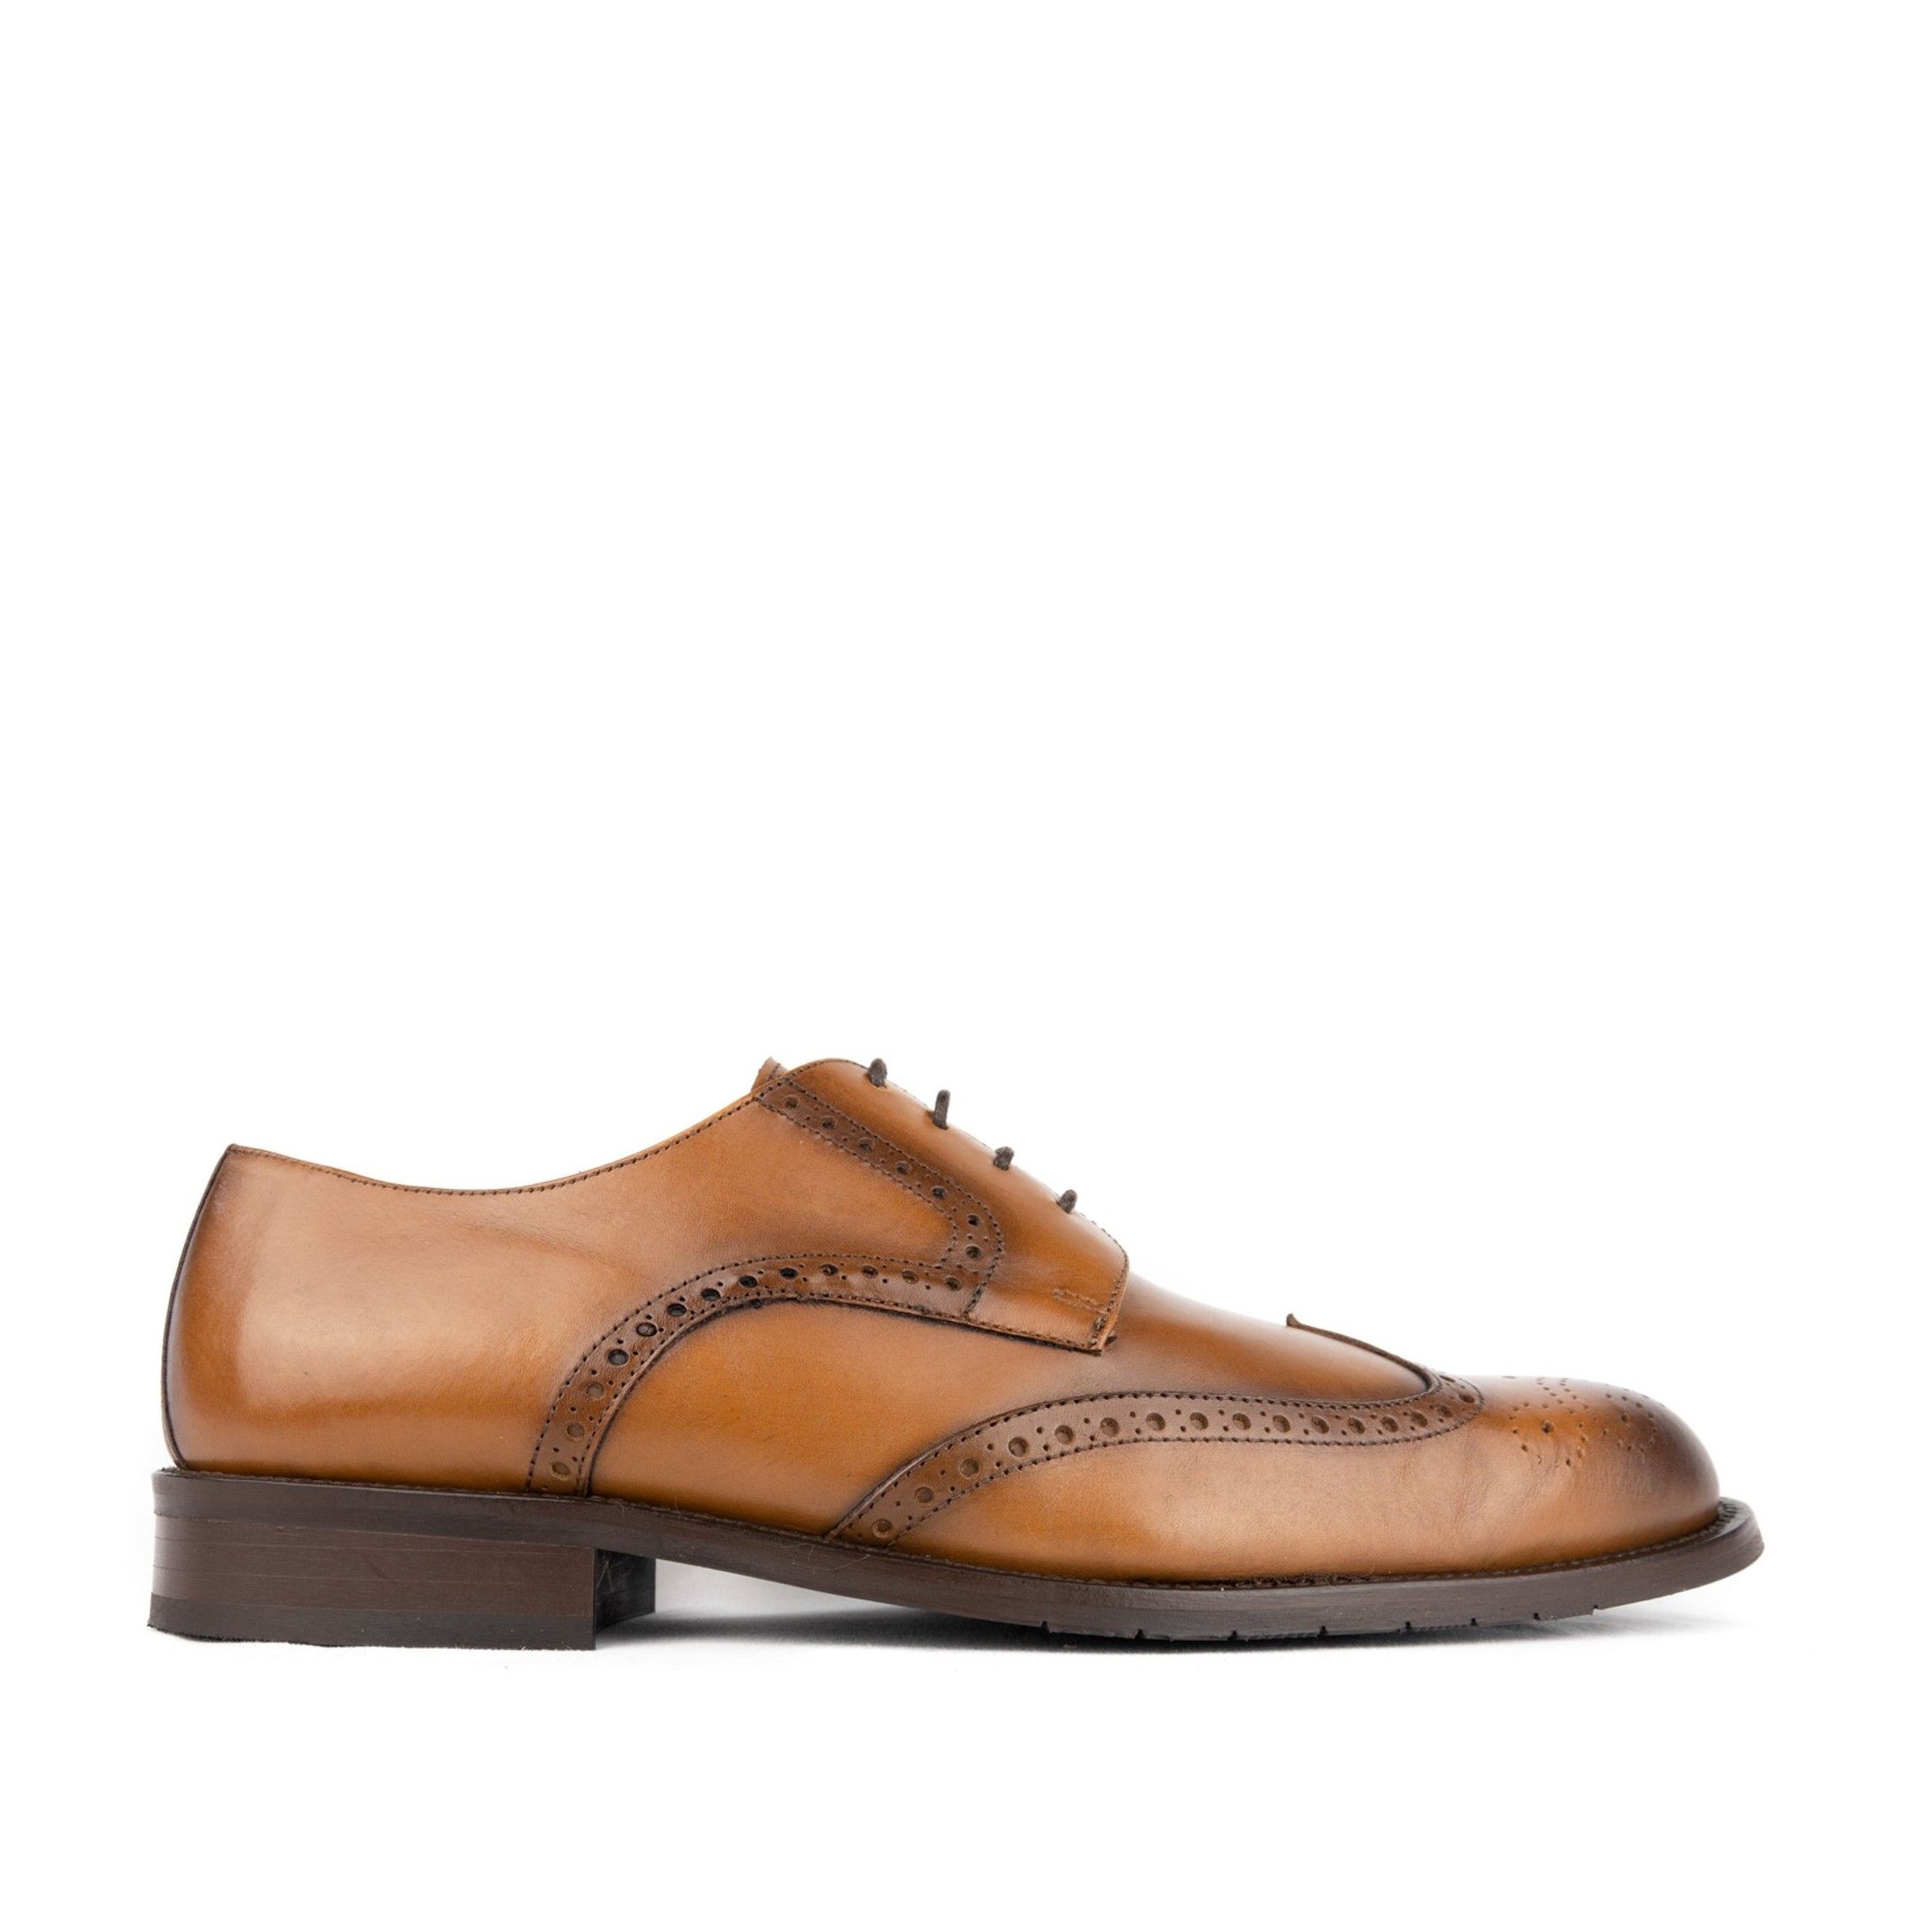 Nappa Leather Lace up shoes. Premium Collection of Son Castellanisimos. Outer material: Cowhide leather. Inner: Cowhide leather. Laces closure. Lining and insole: Cowhide leather. Leather sole. Height heel: 2'5 cm. Designed and manufacture in Spain.